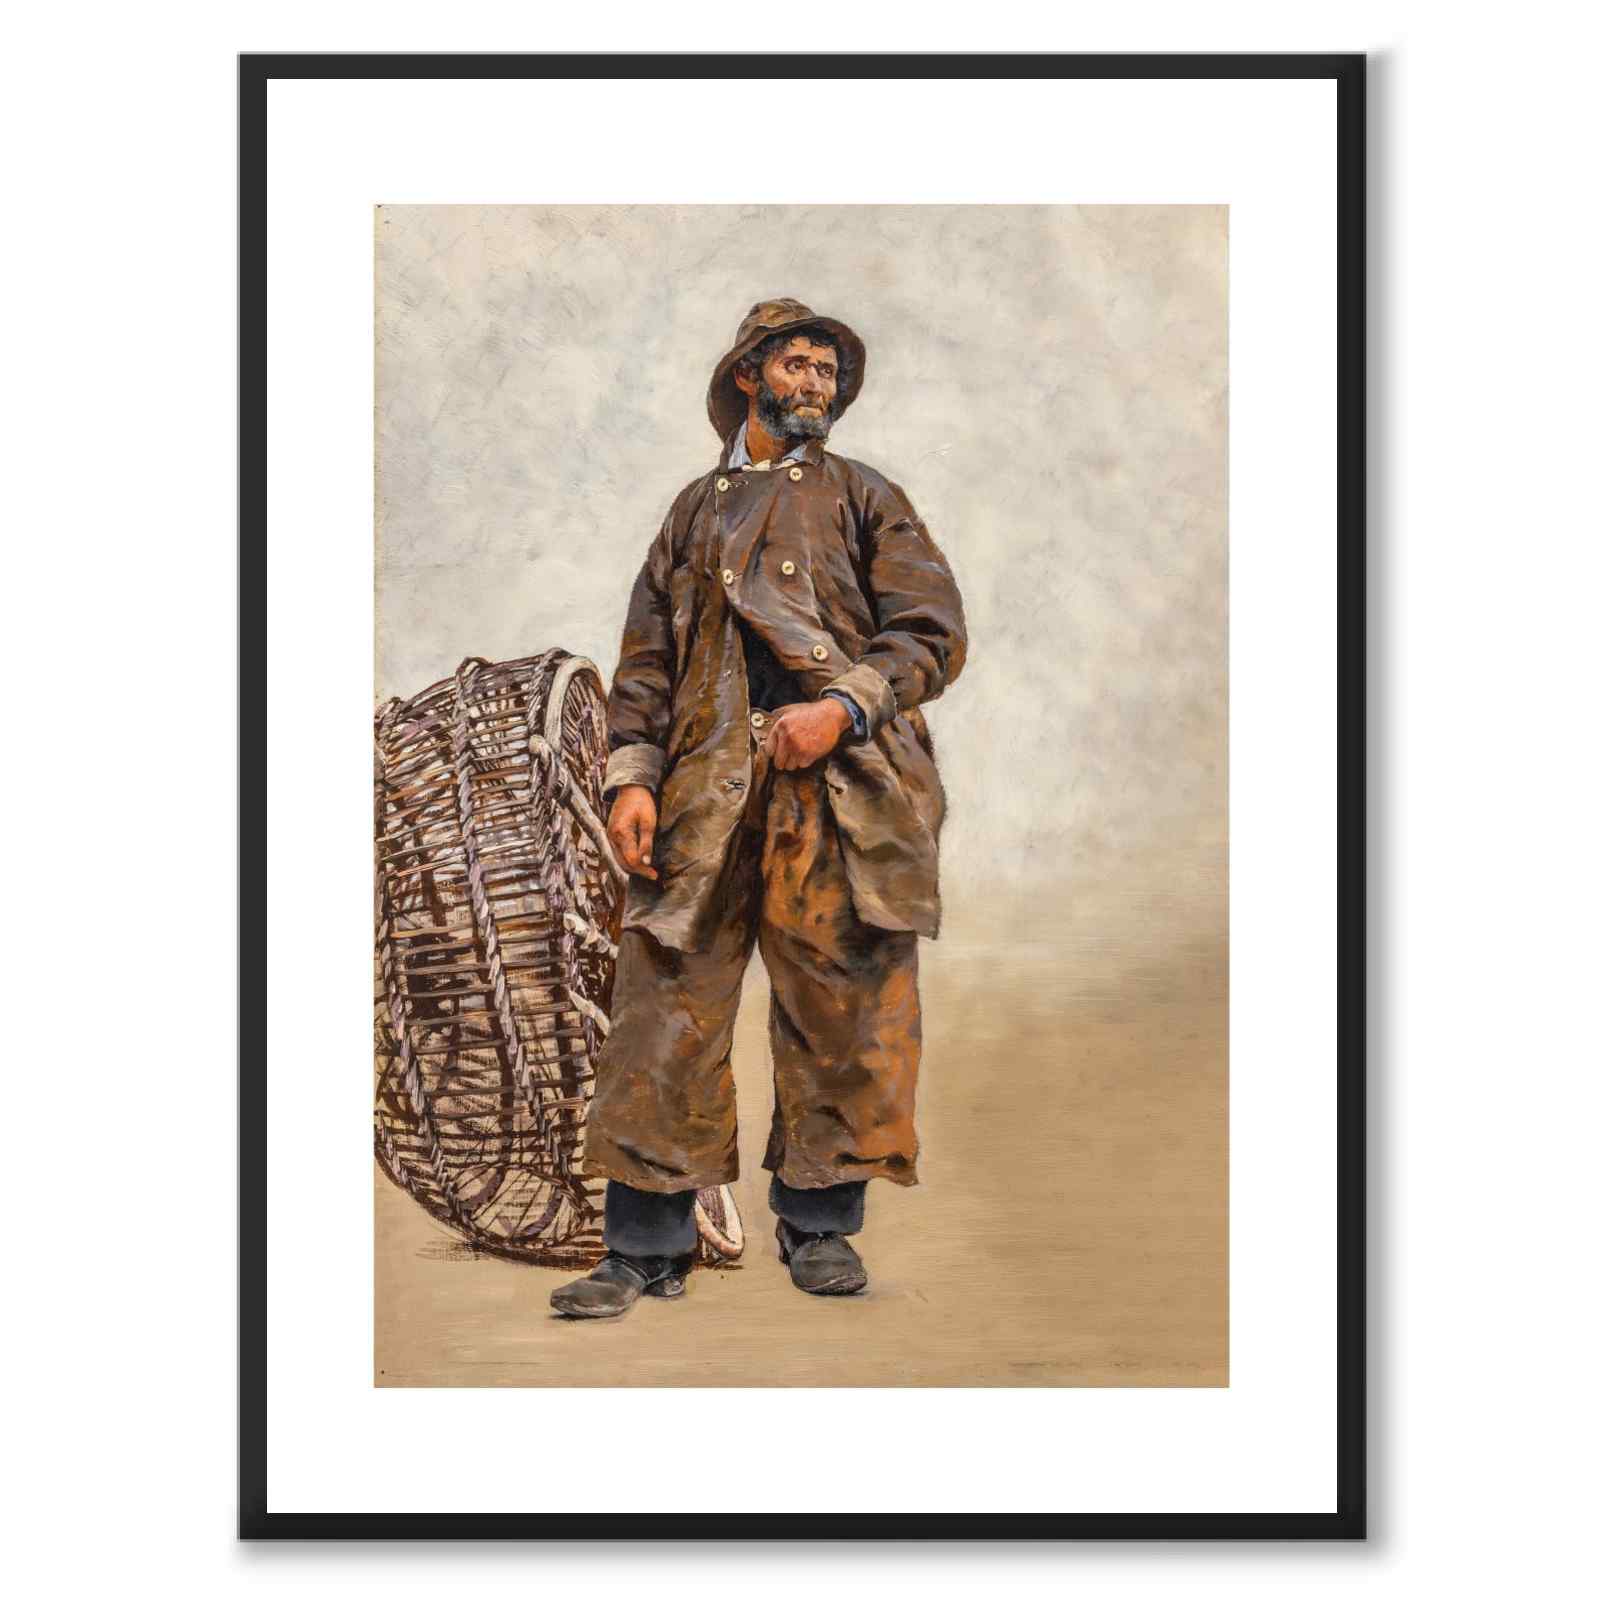 Fisherman with Basket - Poster